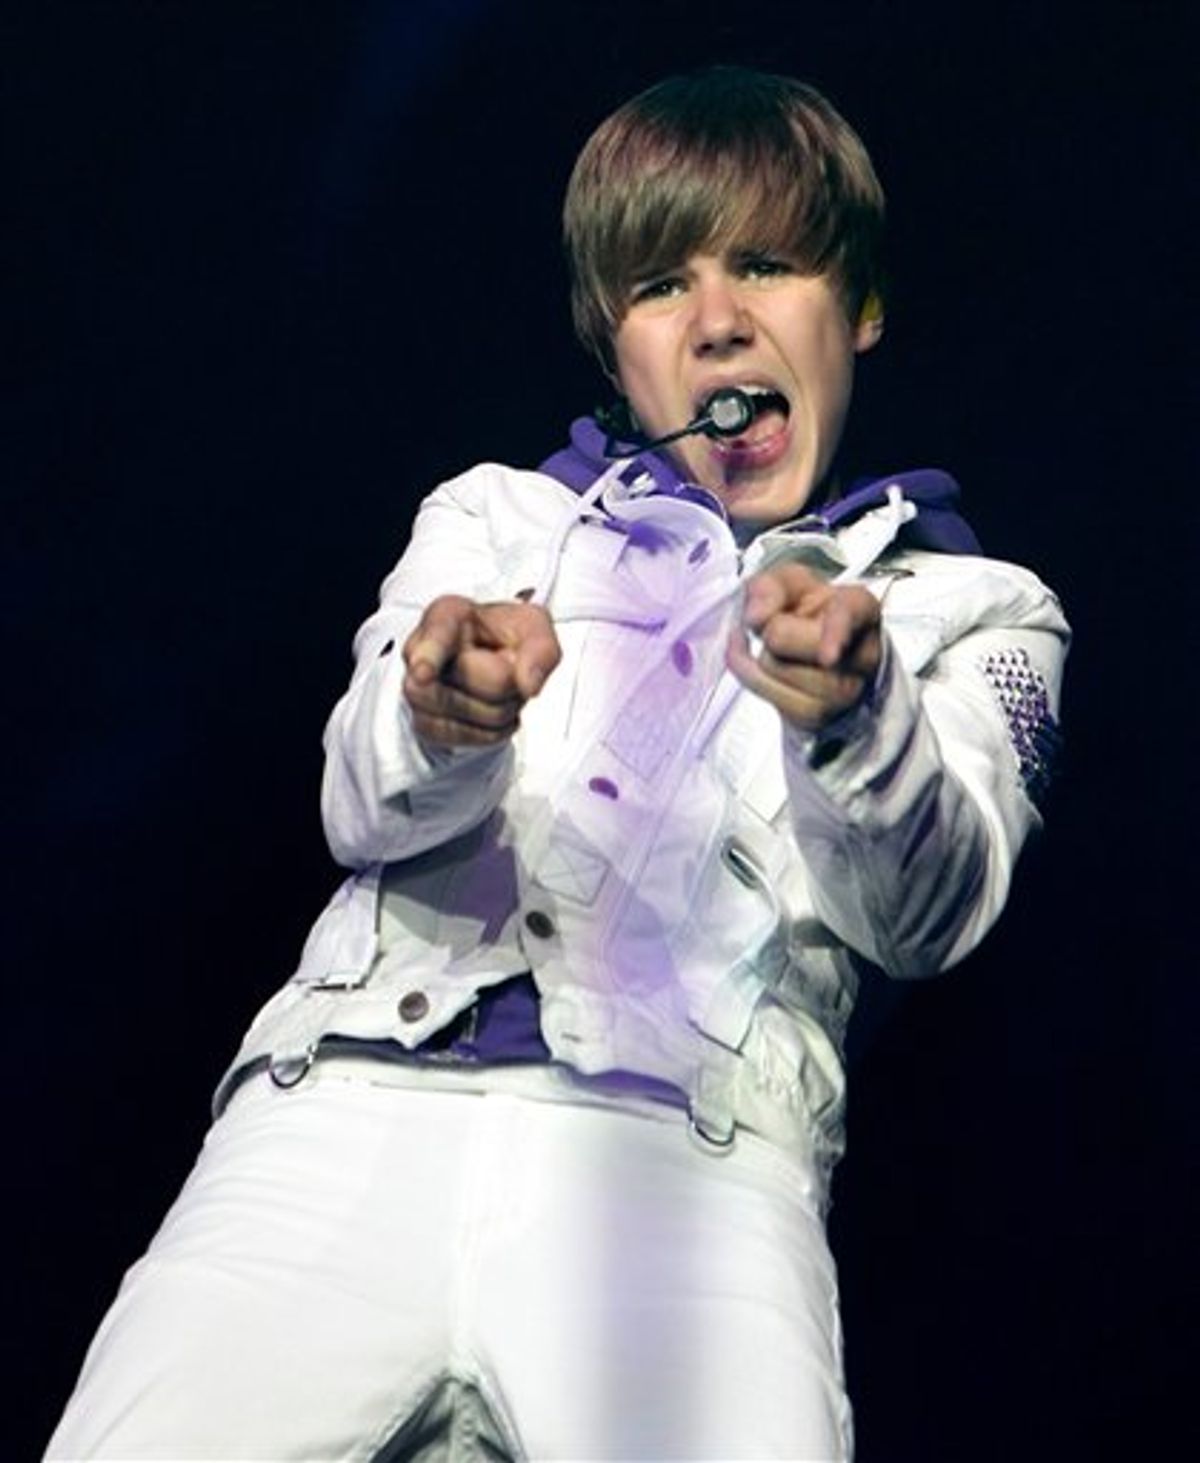 Canadian singer Justin Bieber performs in Vancouver, British Columbia, on Tuesday Oct. 19, 2010. (AP Photo/THE CANADIAN PRESS/Darryl Dyck) (AP)